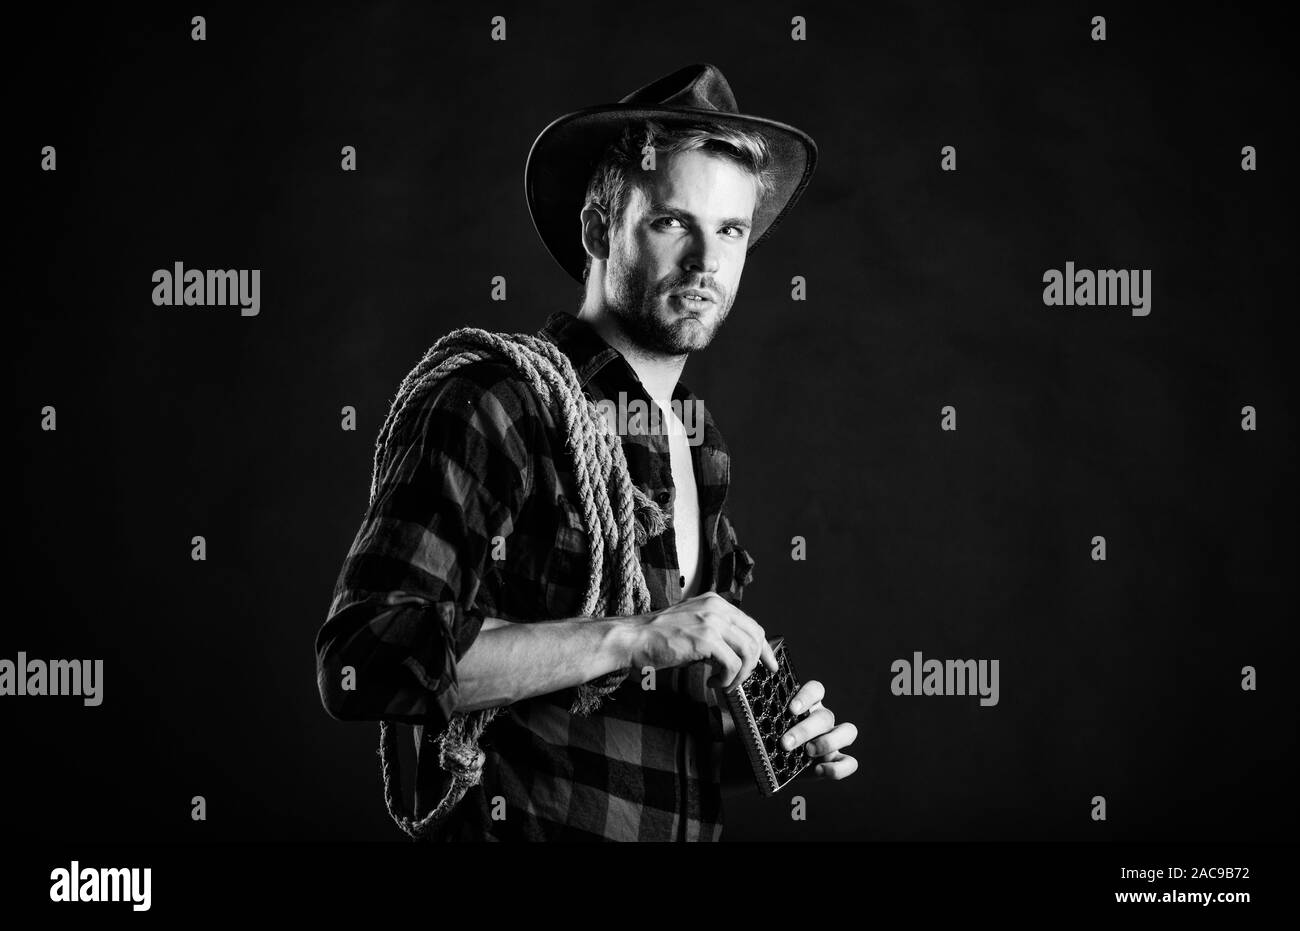 Western culture. Man handsome unshaven cowboy black background. Western life. Man wearing hat hold rope and flask. Lasso tool of American cowboy. Sher Stock Photo